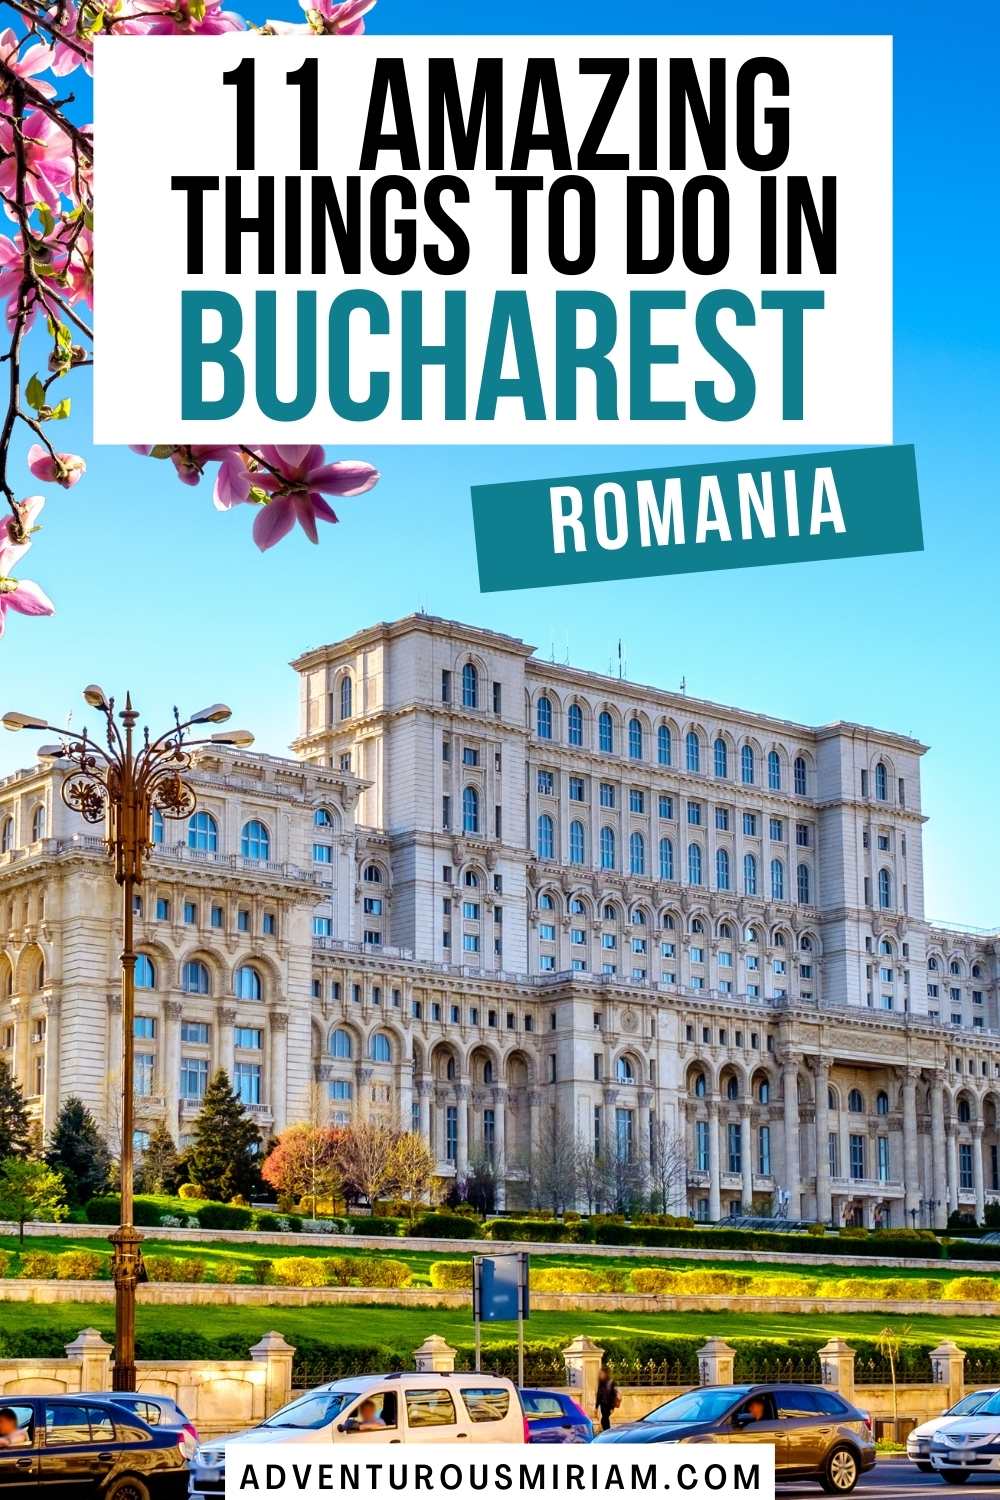 Bucharest’s modern, classic and distressed appearance is what draws you in - plus the fact that it’s a pulsating capital. There are loads of things to do in Bucharest. Here's a list of 10 amazing attractions in Bucharest, Romania, including hotel and restaurant tips.